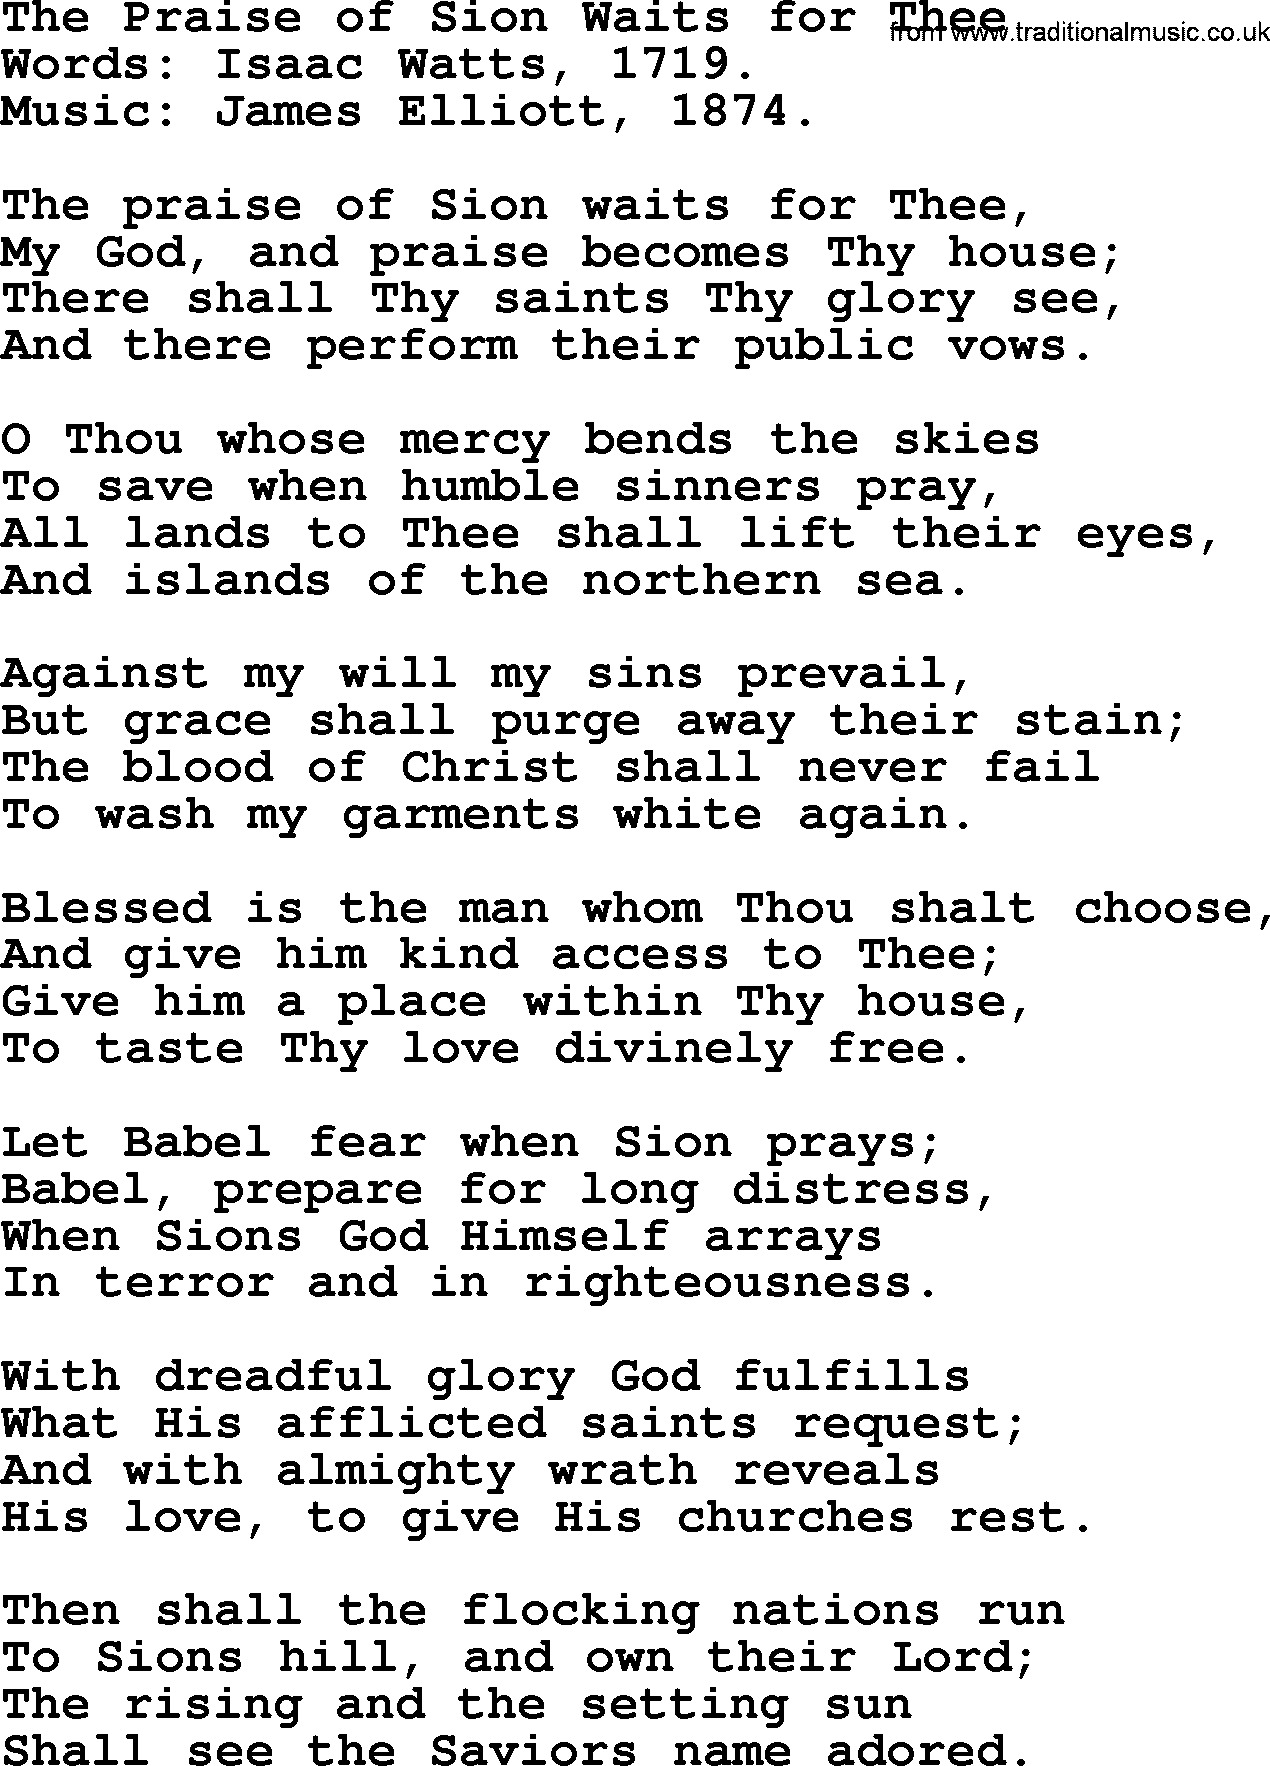 Isaac Watts Christian hymn: The Praise of Sion Waits for Thee- lyricss